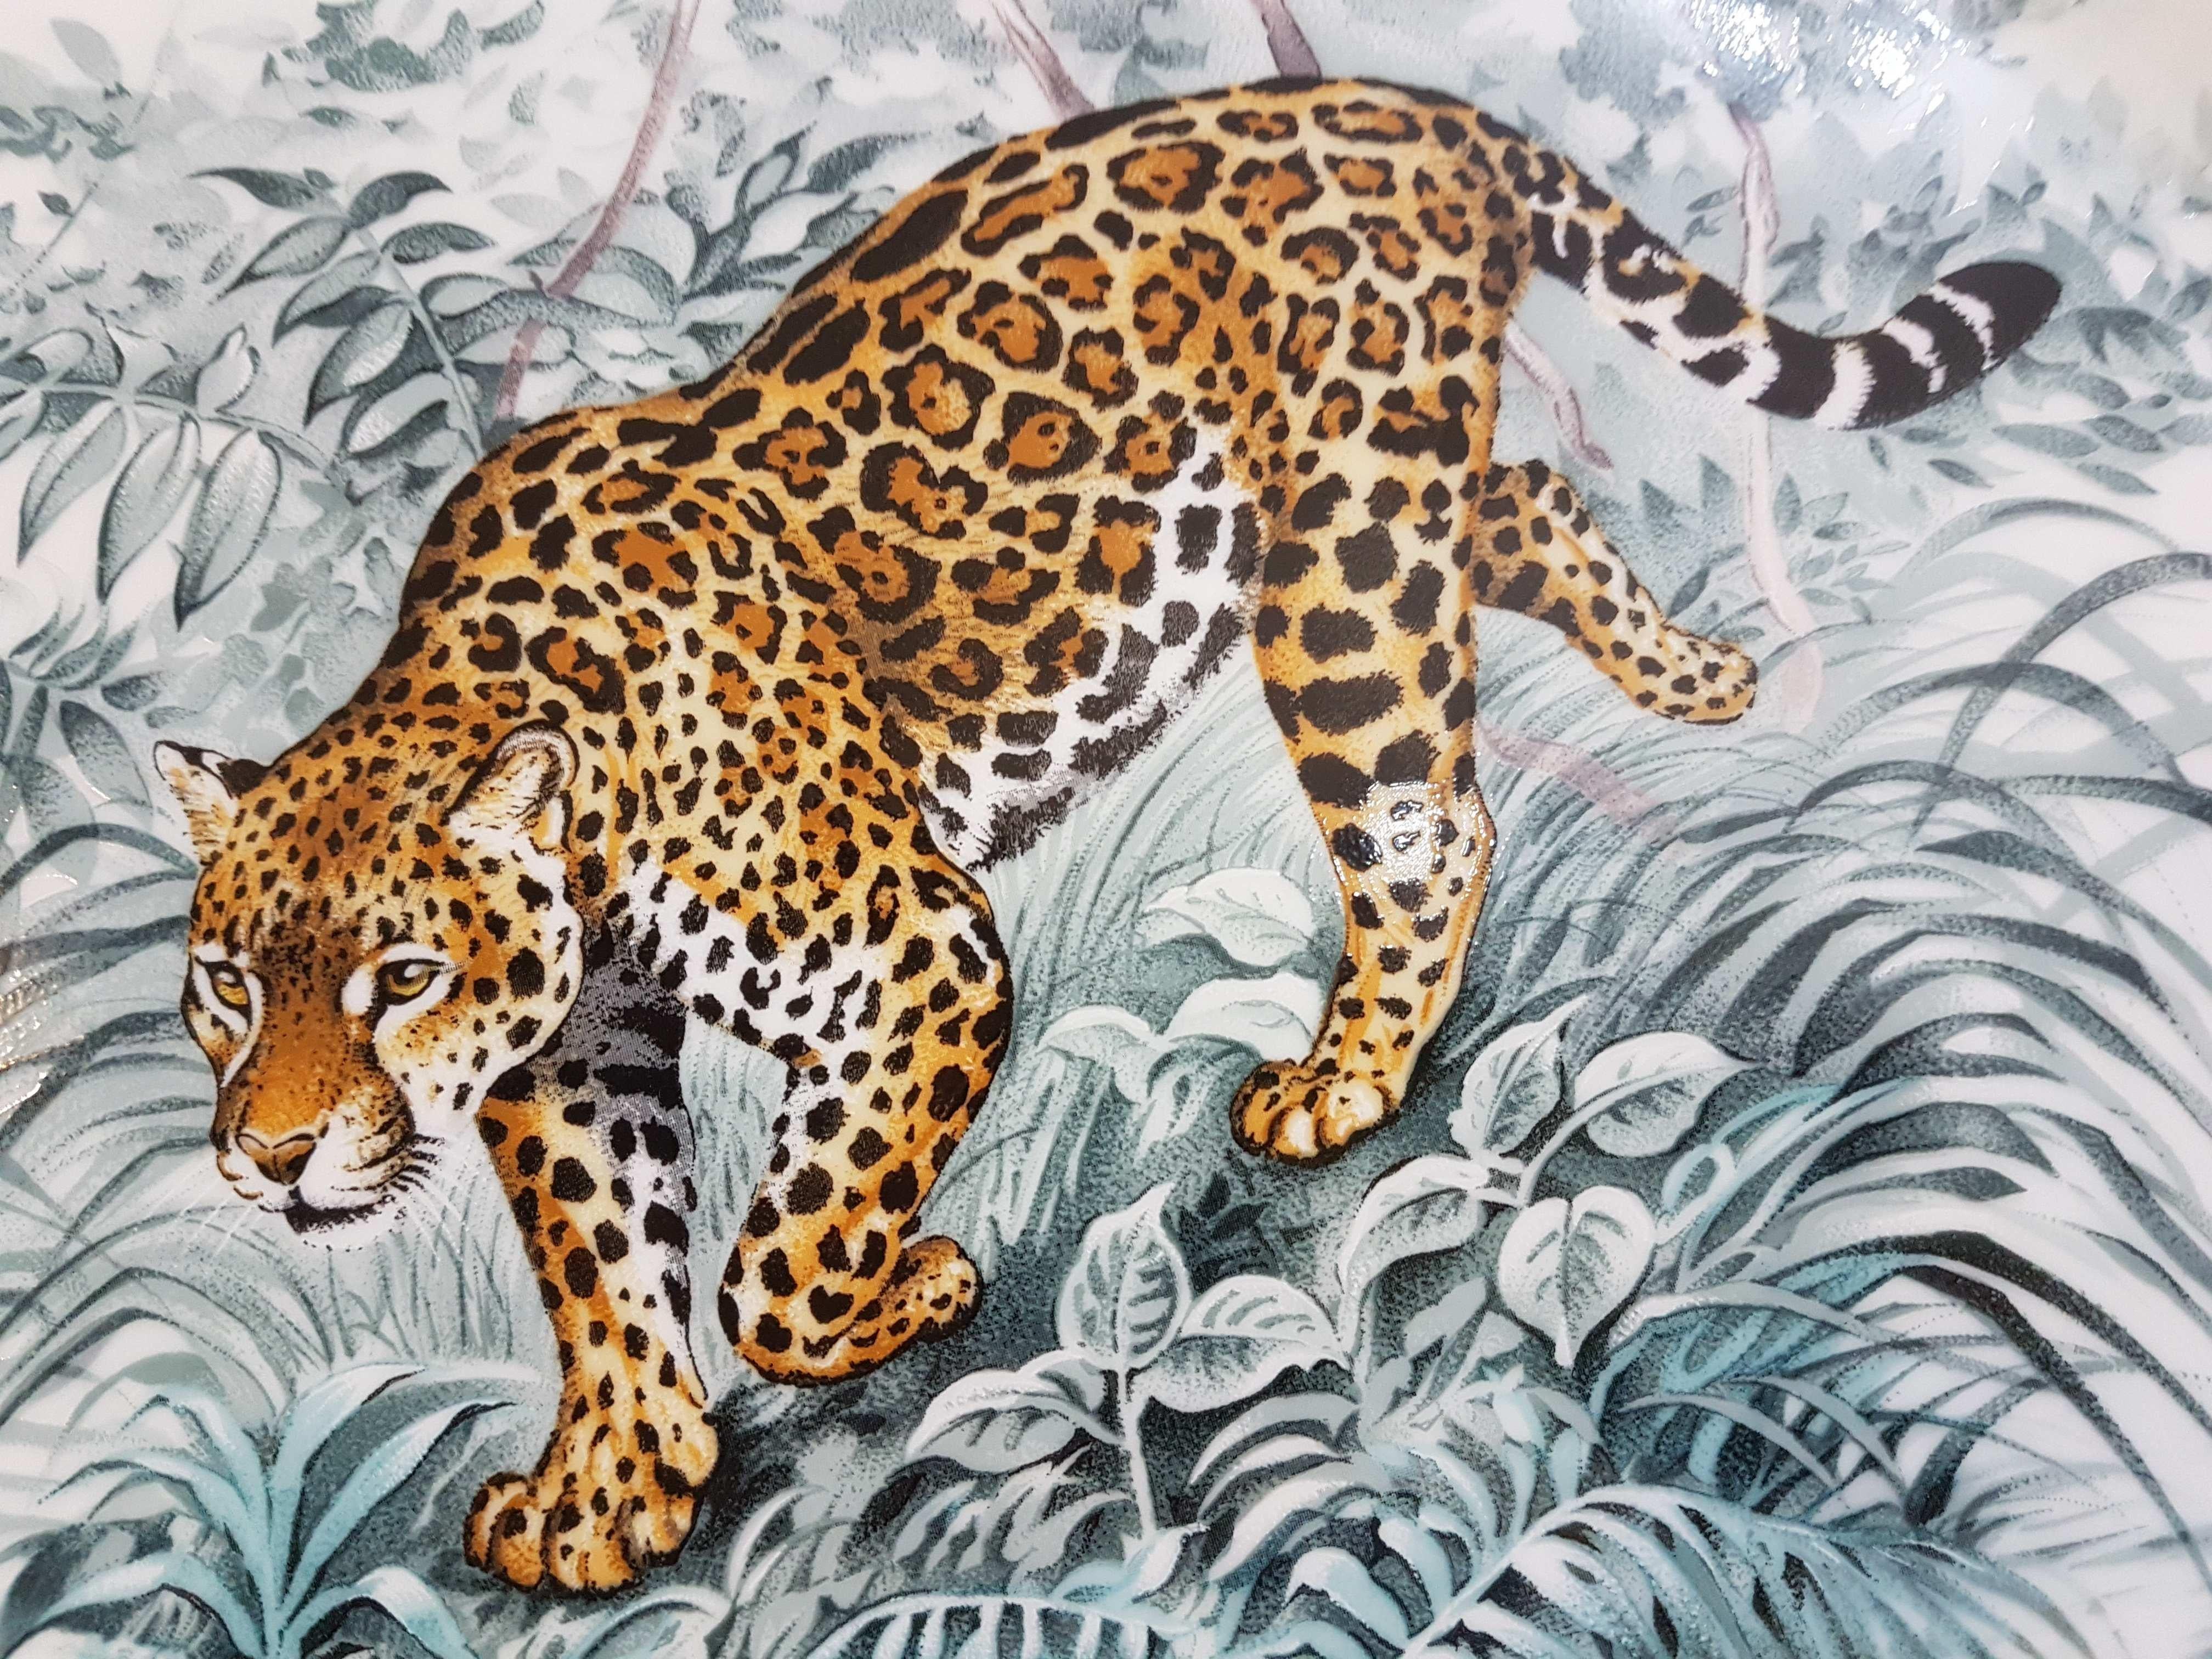 Hermès Carnets d' Equateur: jaguars, macaws, panthers and impalas frolic through lush natural settings under the watchful eye of naturalist and painter Robert Dallet. This porcelain collection breathes new life into the full range of the artist’s